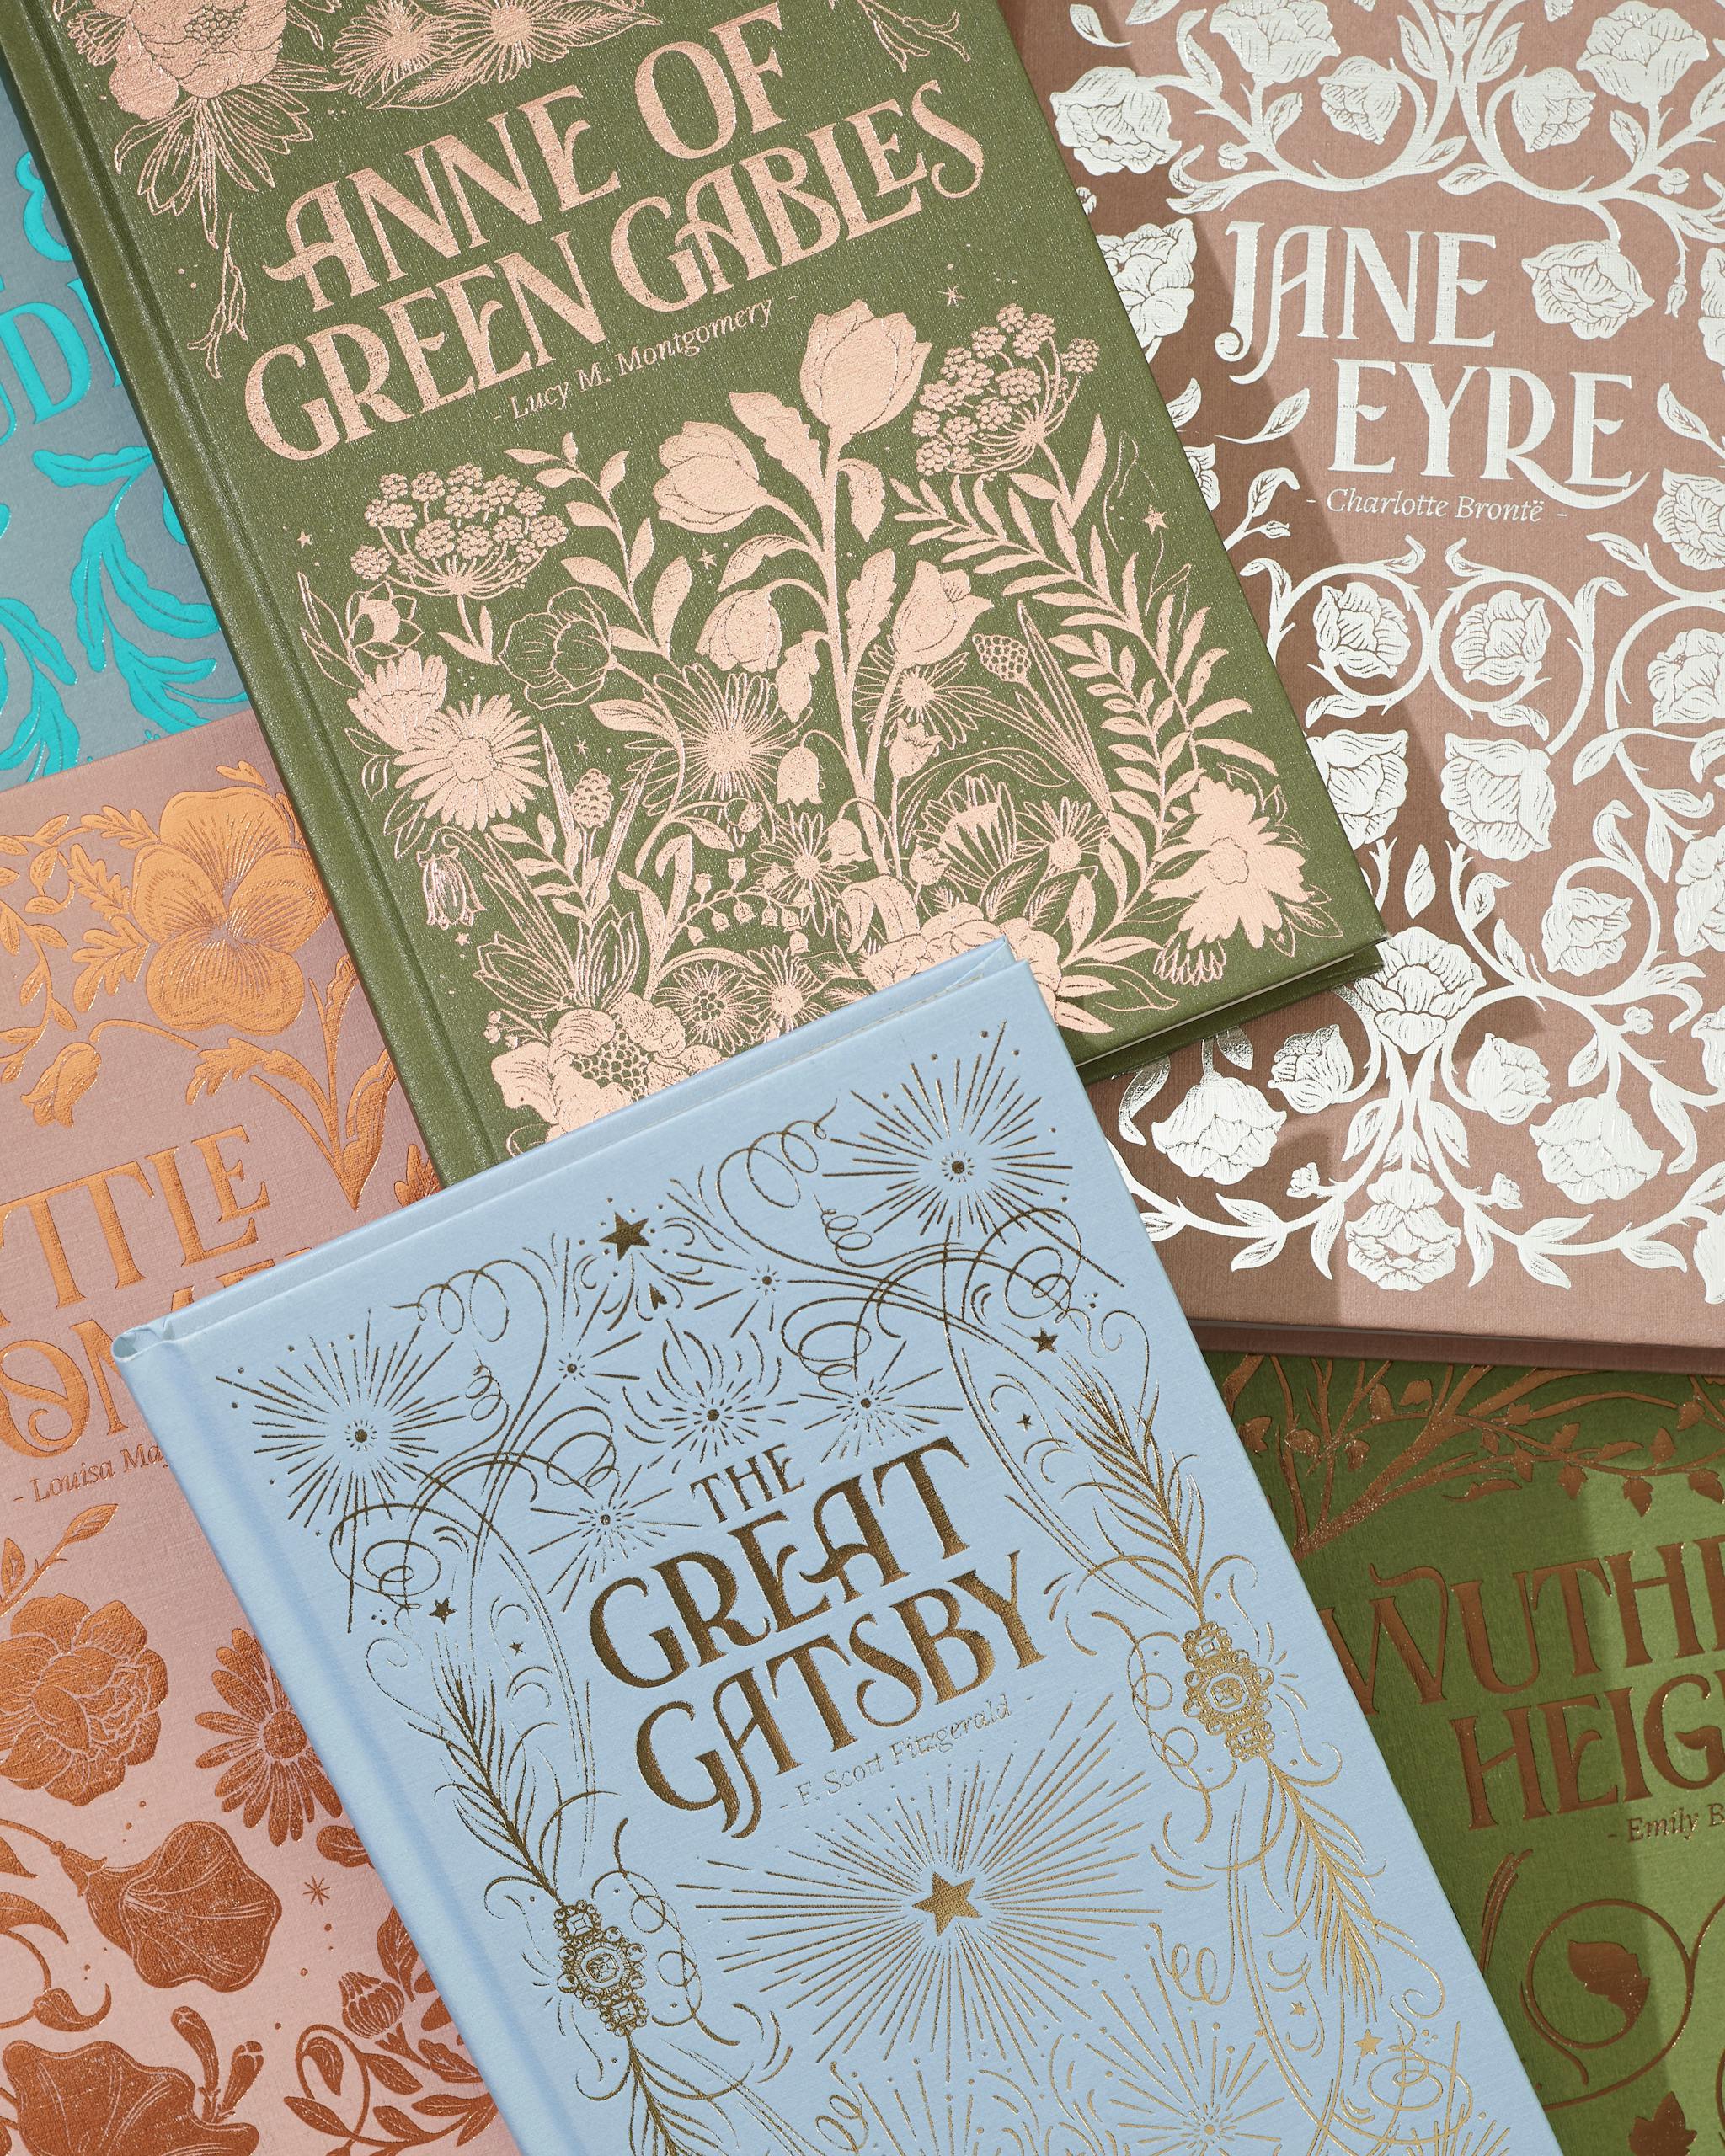 Illustrated covers for Wordsworth edition